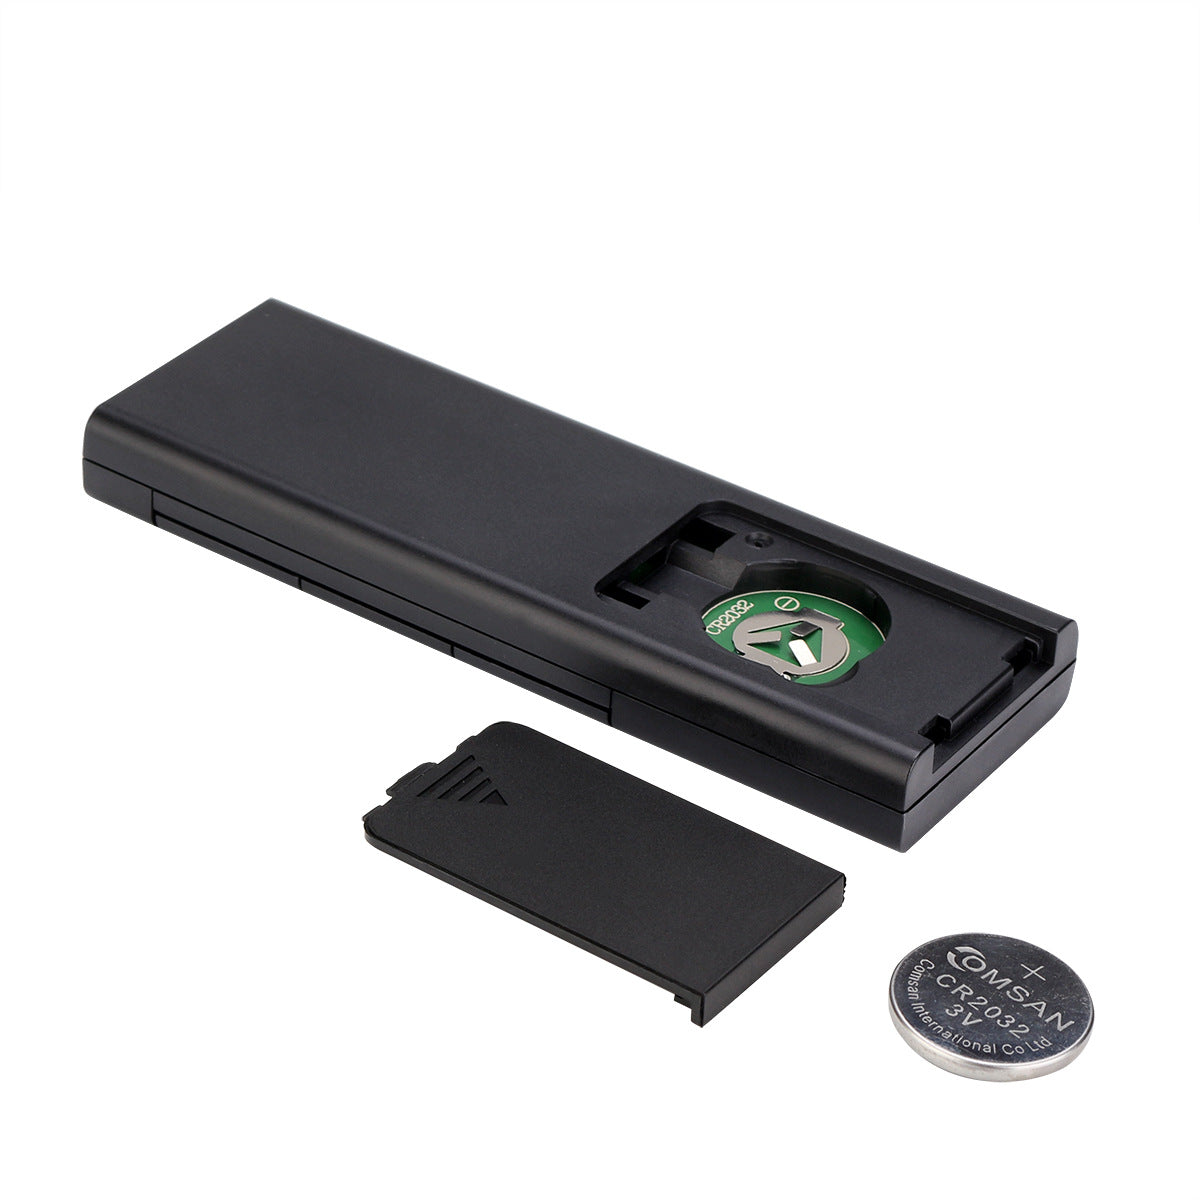 A sleek black handheld device with a button interface is shown alongside a black opening tool and a coin cell battery.